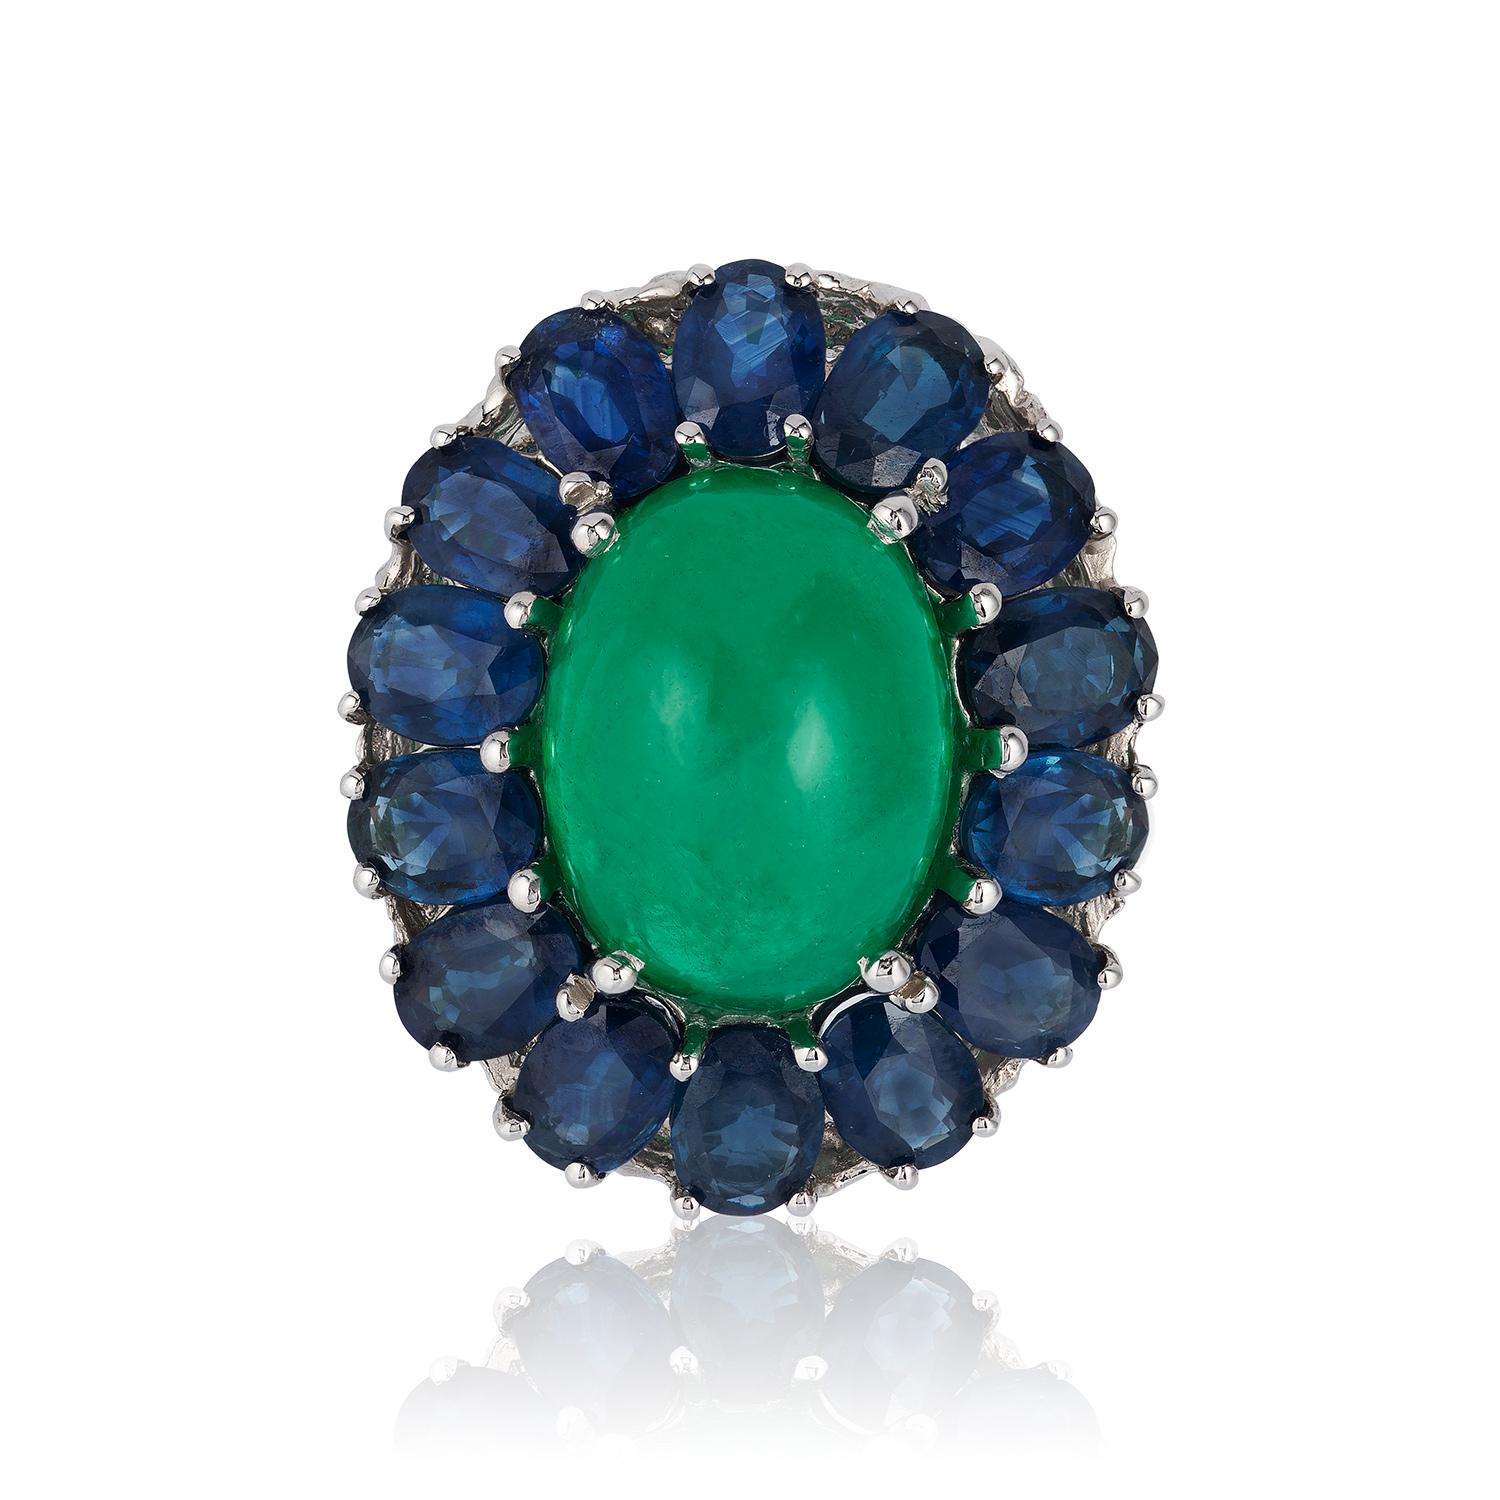 Andreoli Colombian Cabochon Emerald Blue Sapphire Cocktail Dome Ring

This Ring Features a 17.43 carat vivid green Colombian dome shaped cabochon emerald accented with 11.25 carats of 7x5mm Blue sapphires from the legendary Kanchanaburi mine in